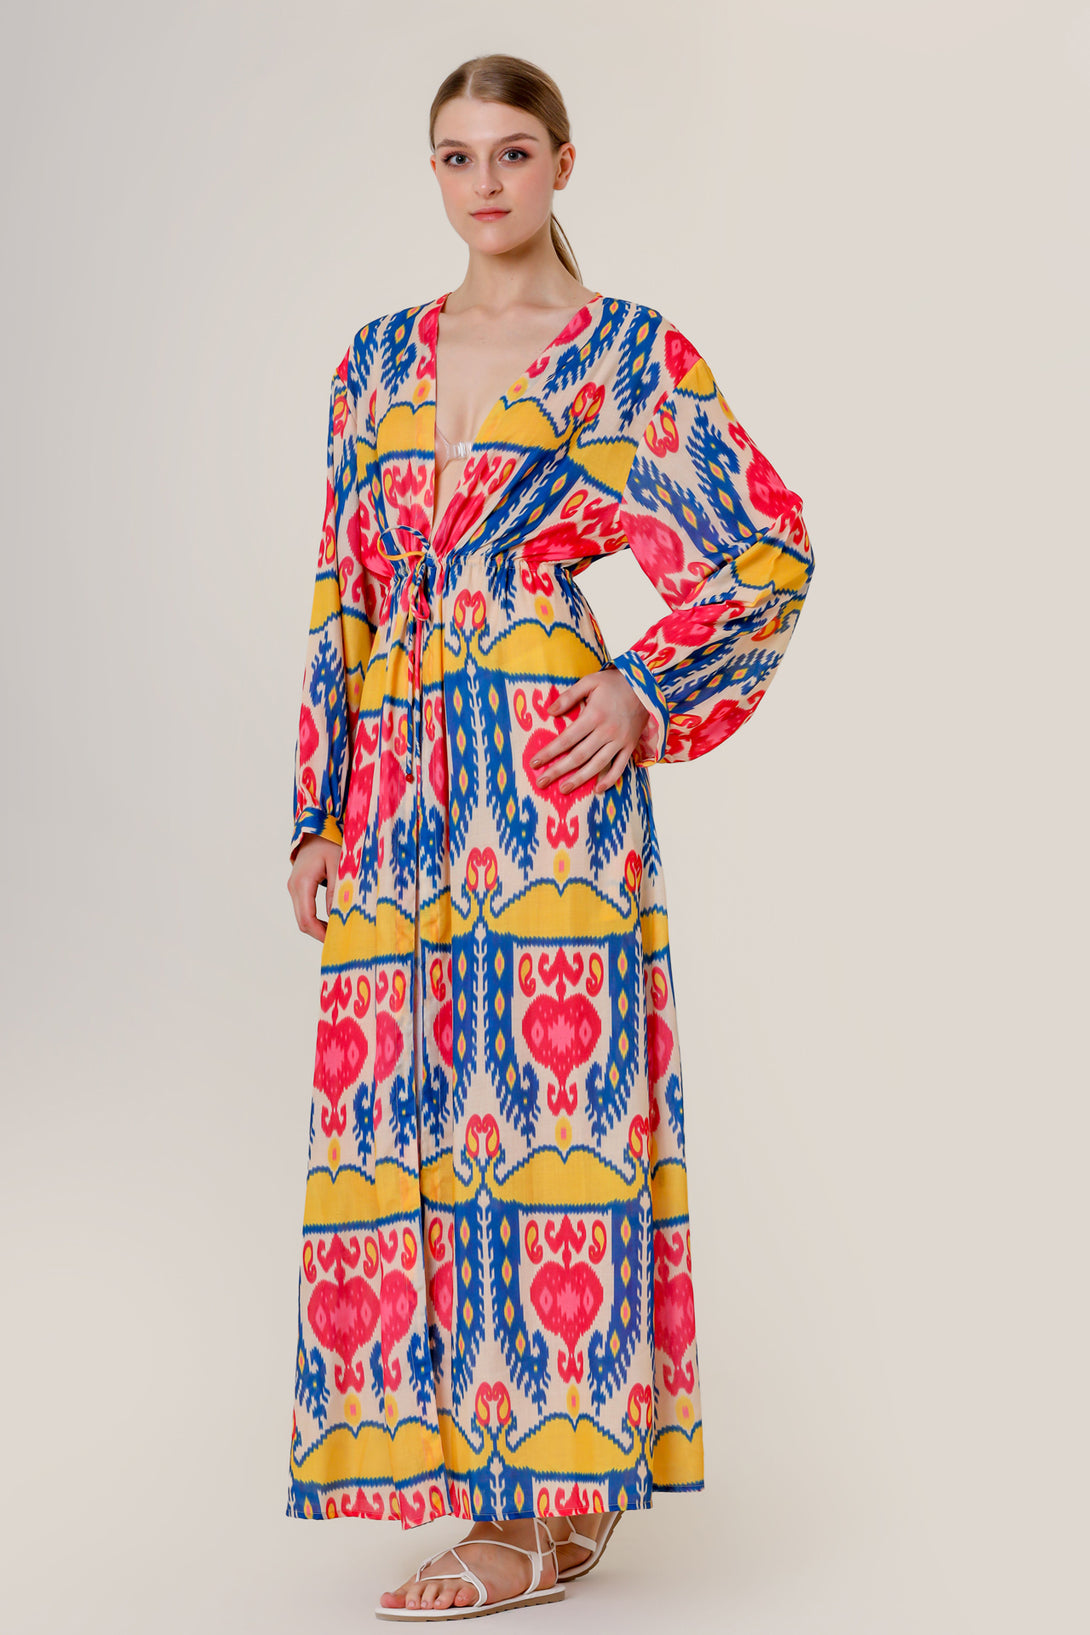 long flowy dresses, long dresses with sleeves, dresses for women, HT 360 Collective,